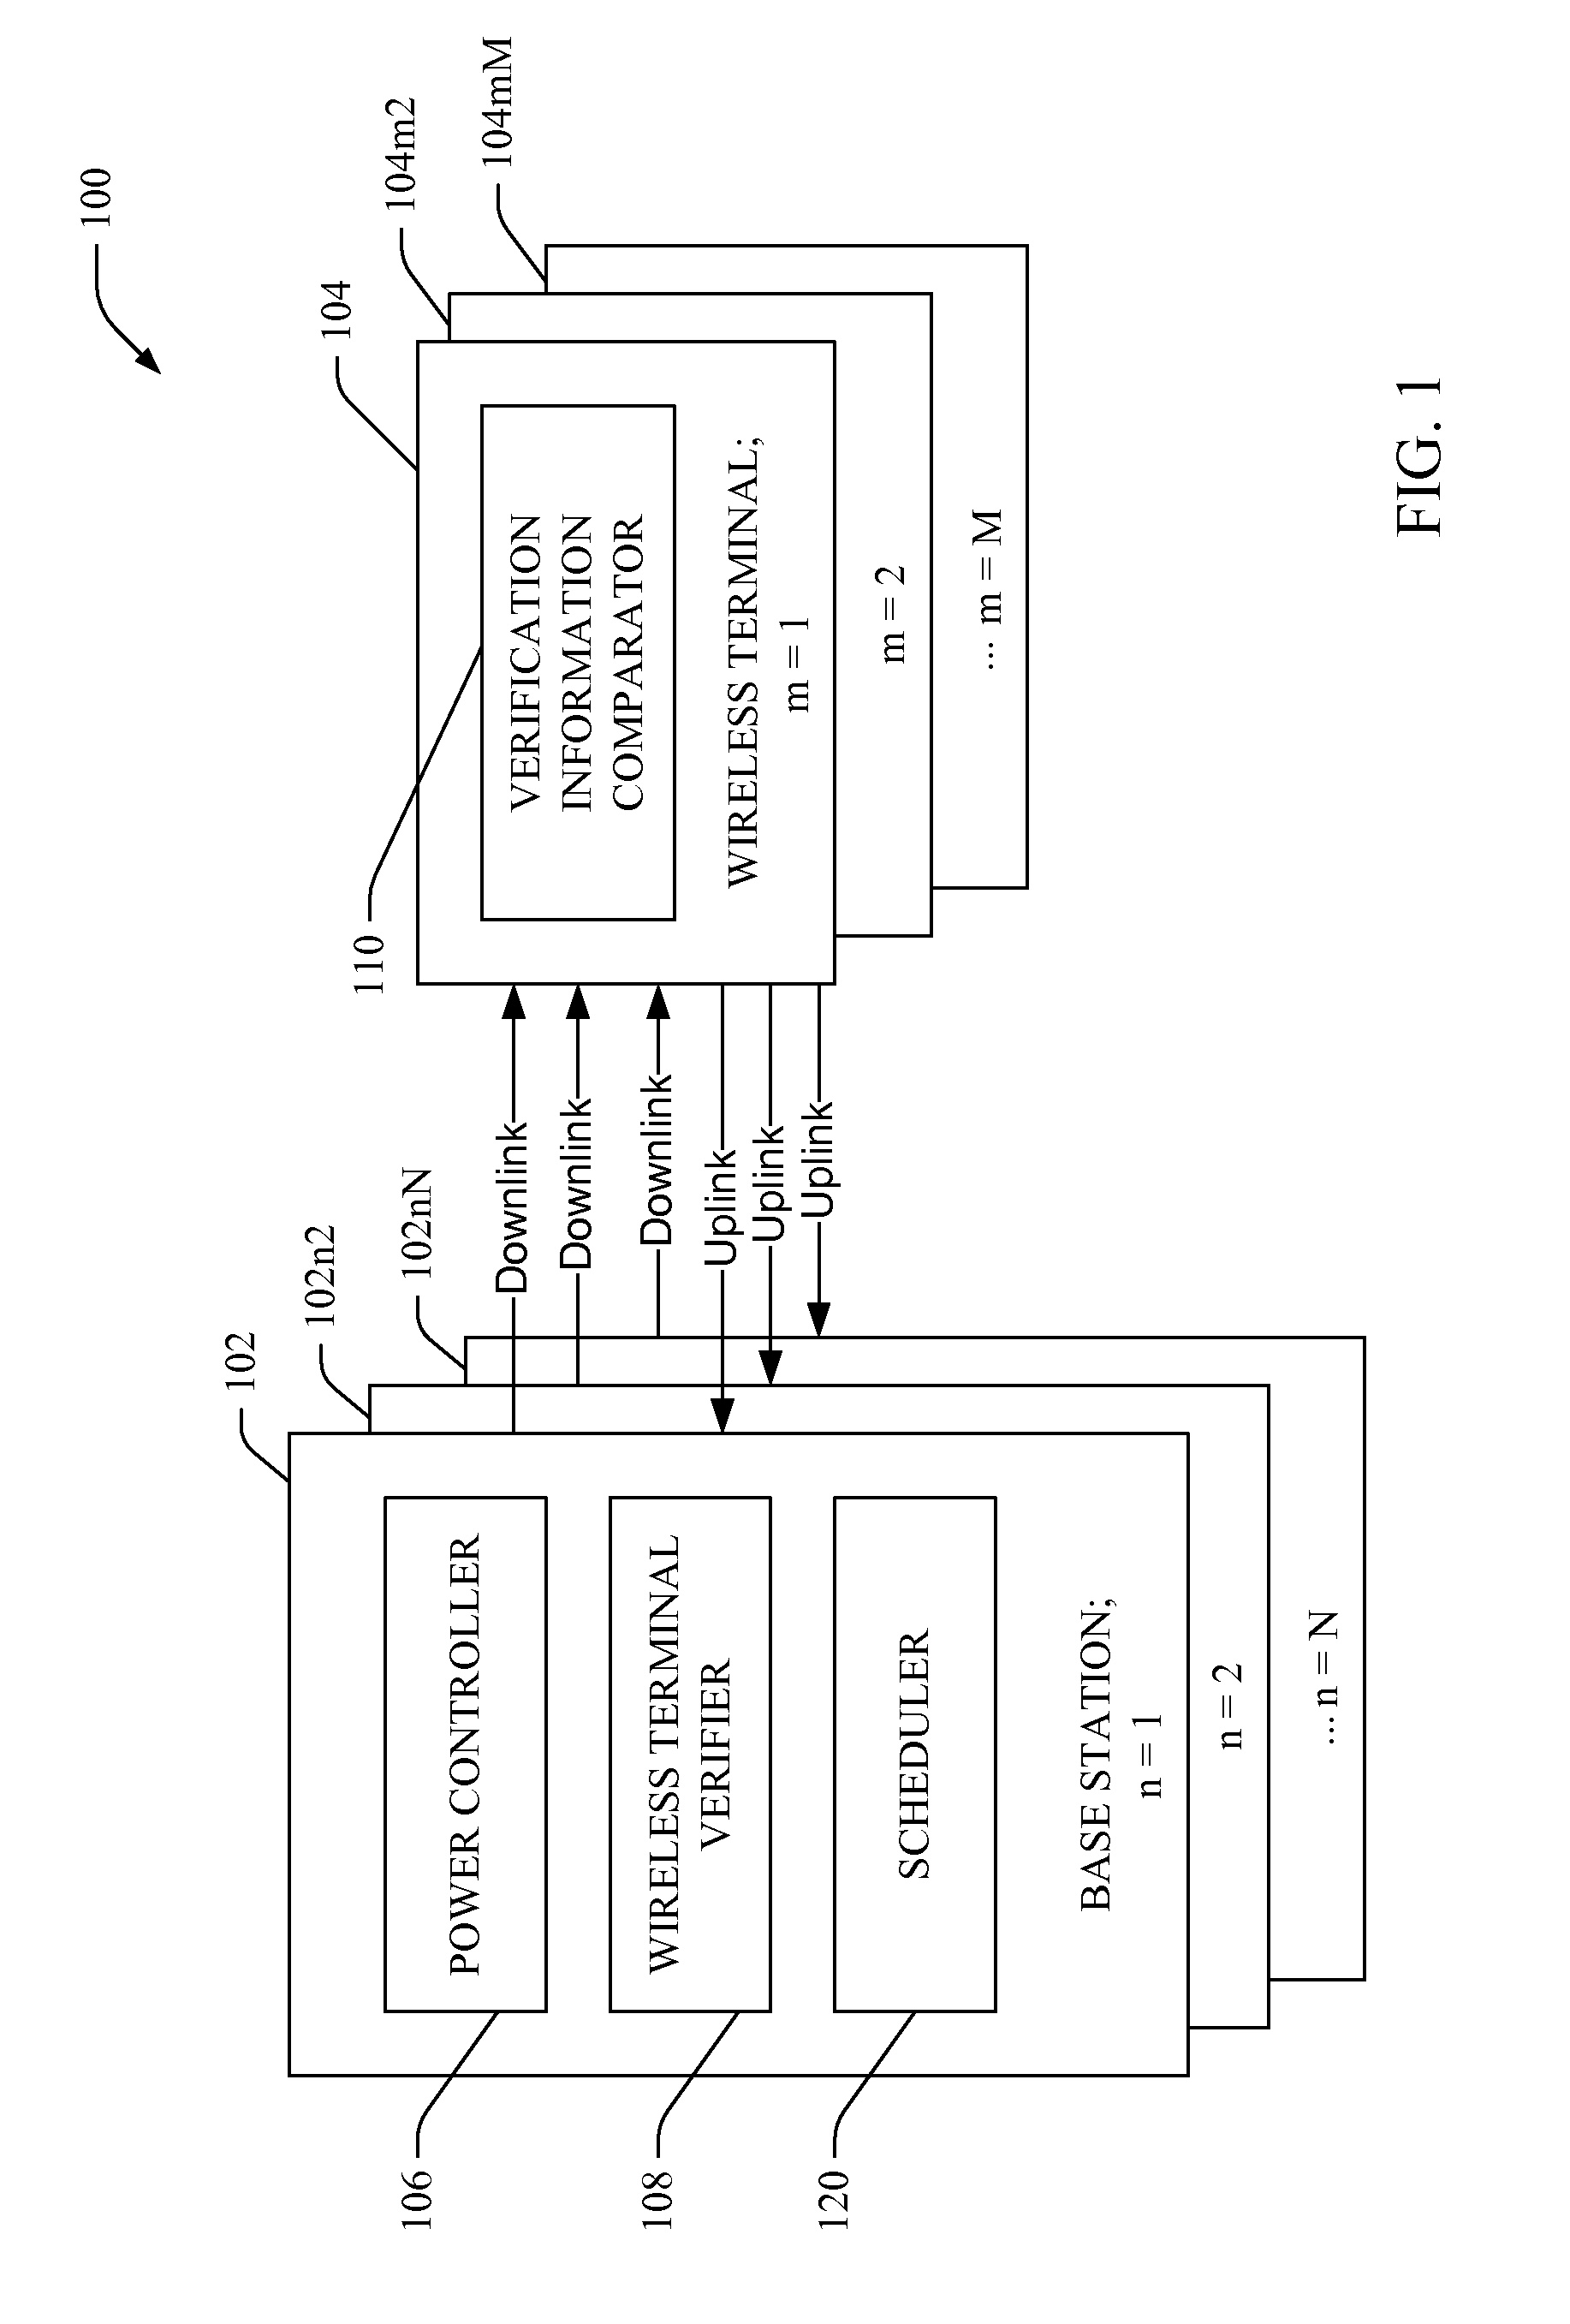 Inter-cell power control for interference management